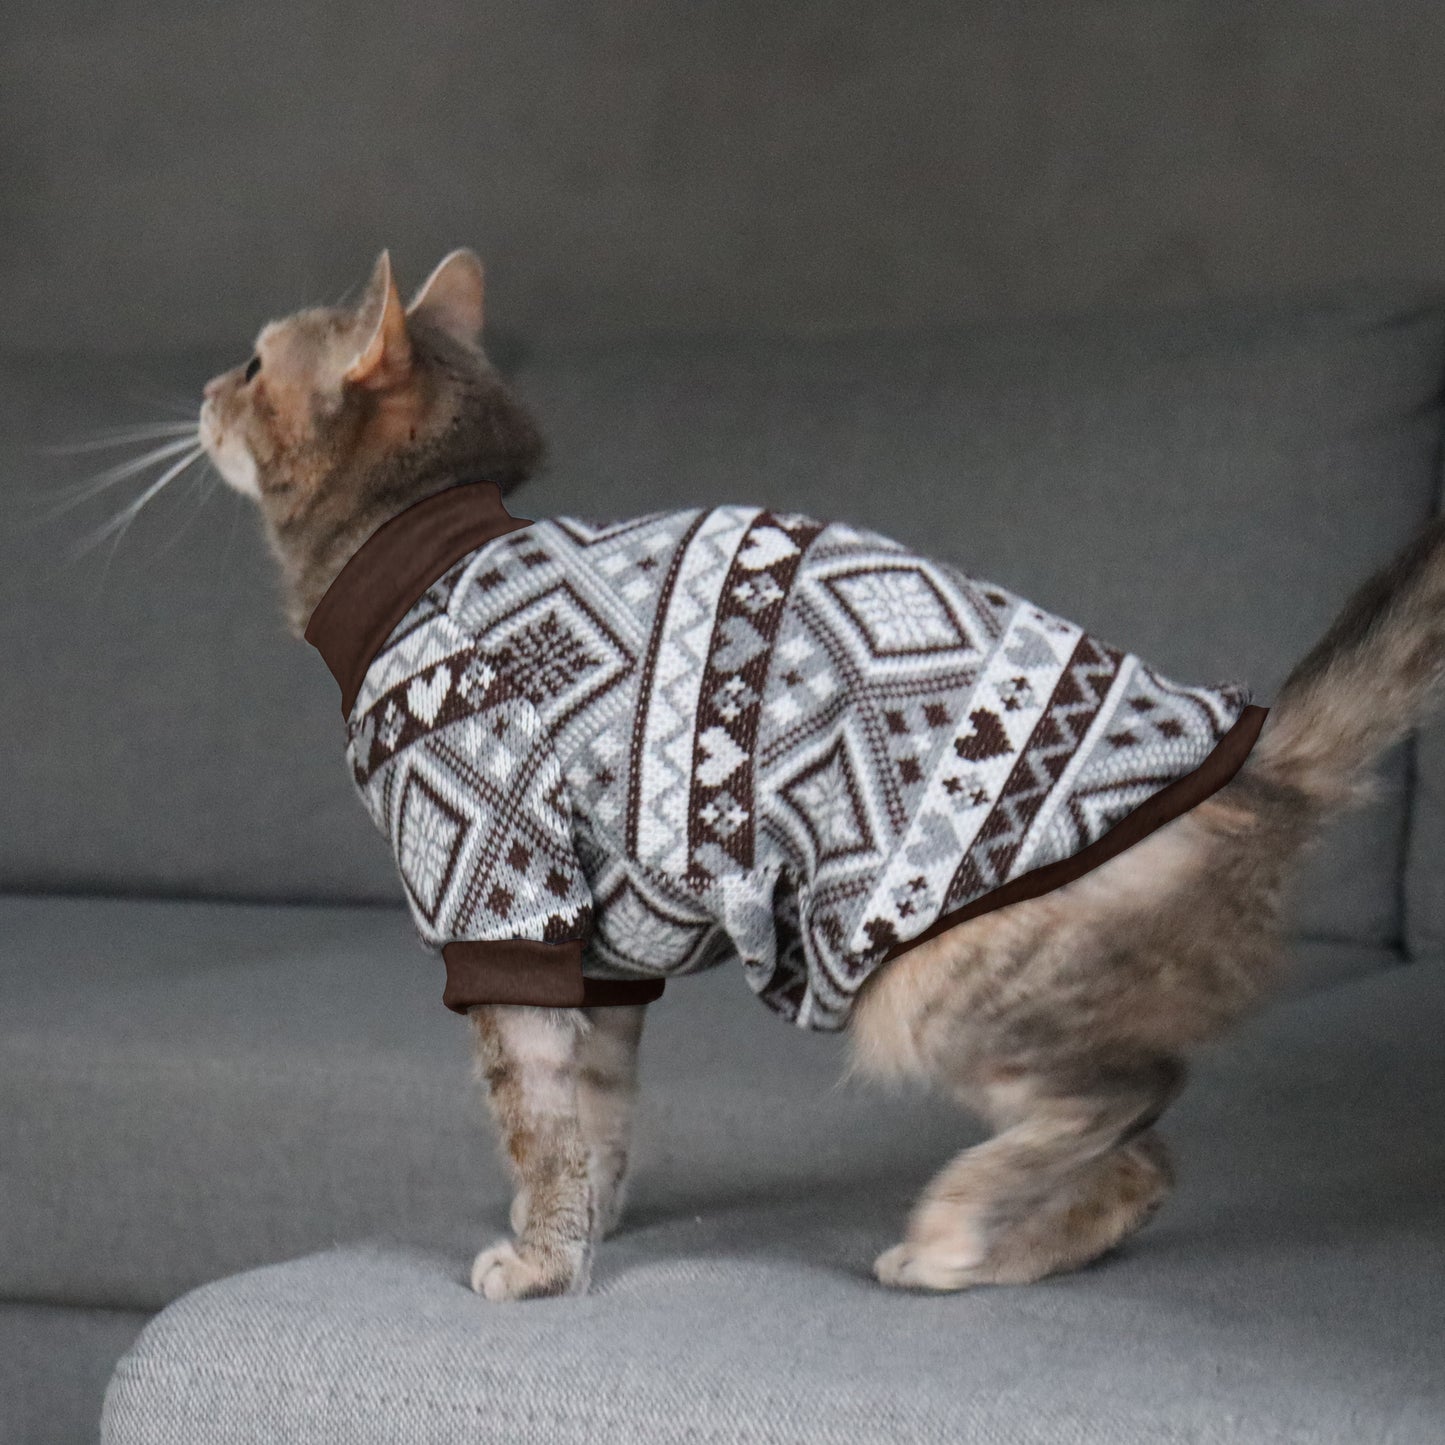 Christmas sweater for Cat. Shirt for Sphynx and all cats breeds